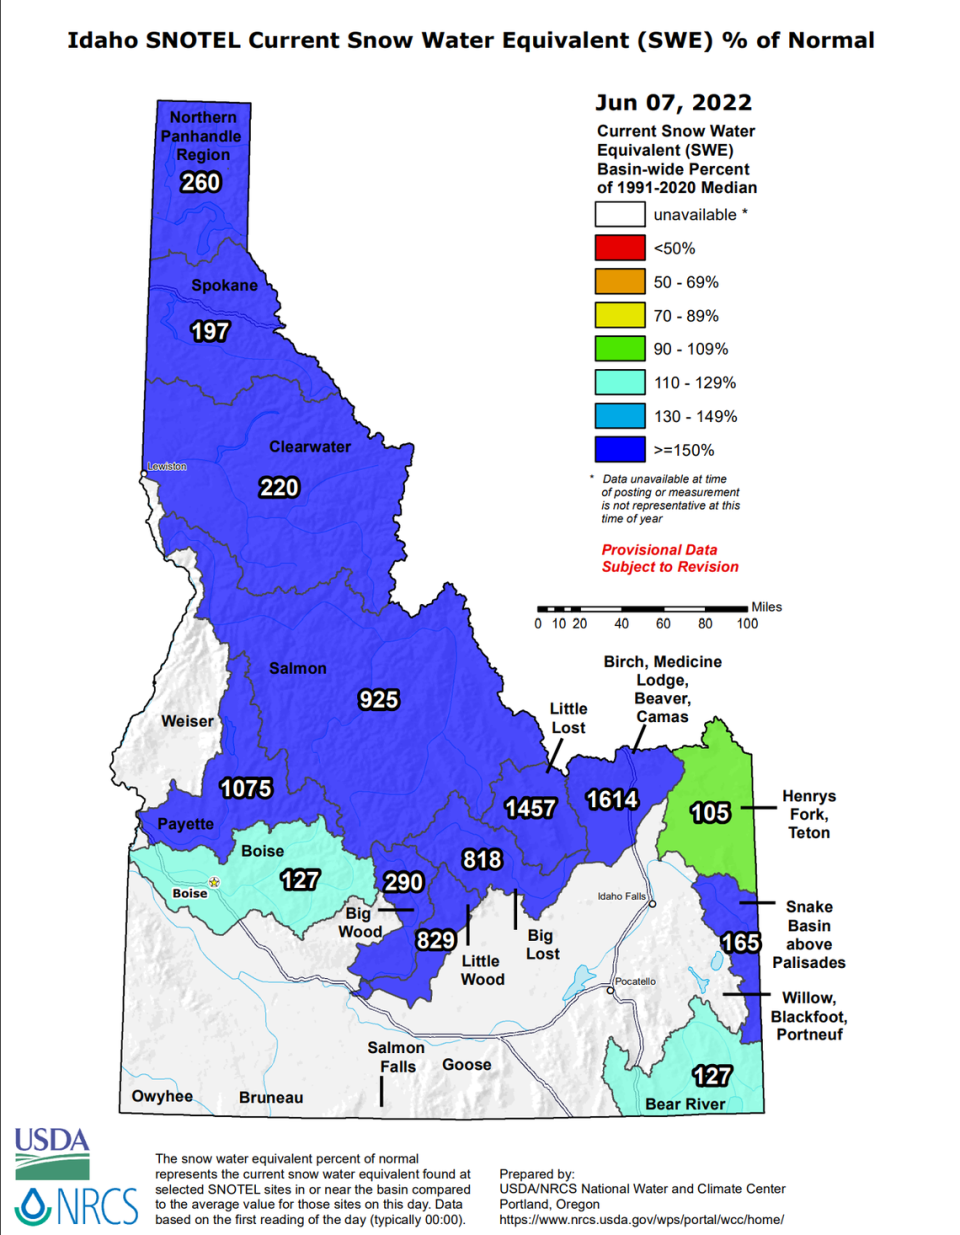 The Snow Water Equivalent percentages in Idaho as of June 7, 2022. All basins that were measured currently have above-average snowpack.